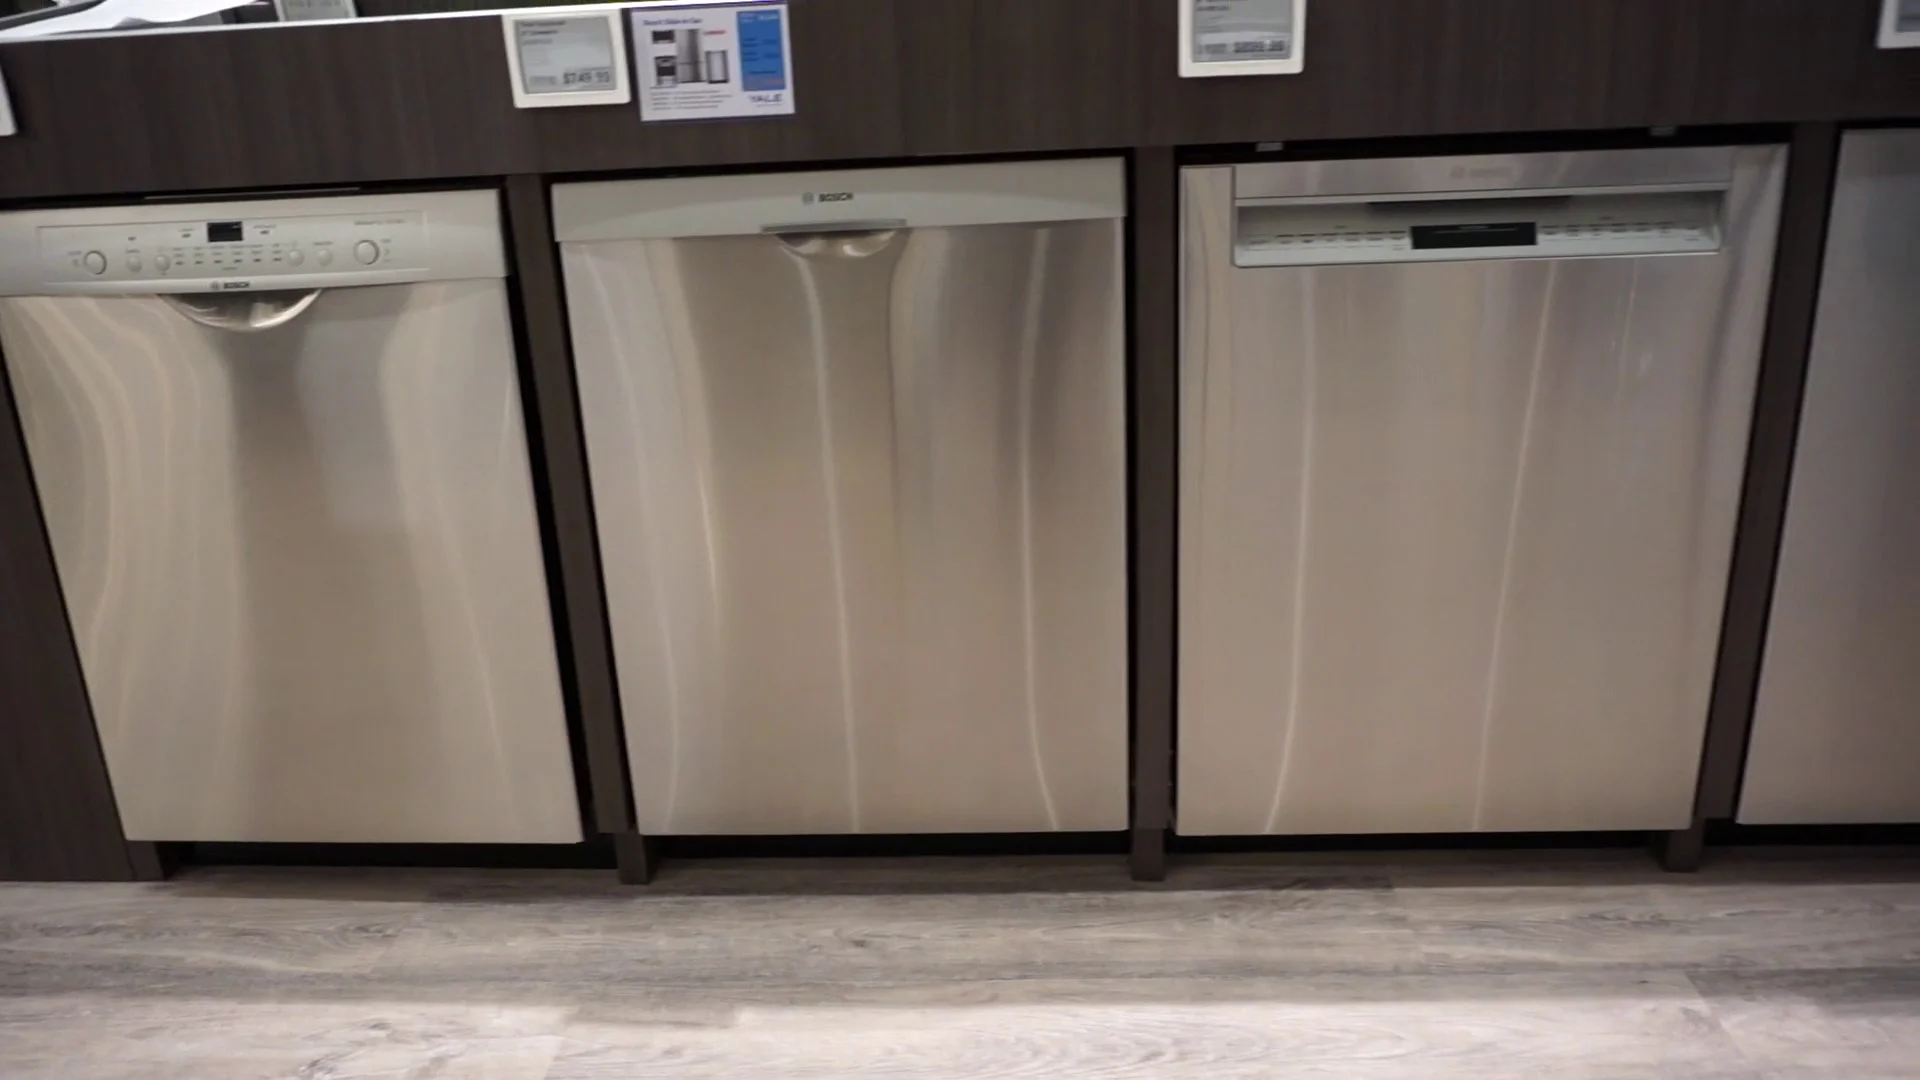 difference in bosch dishwasher series